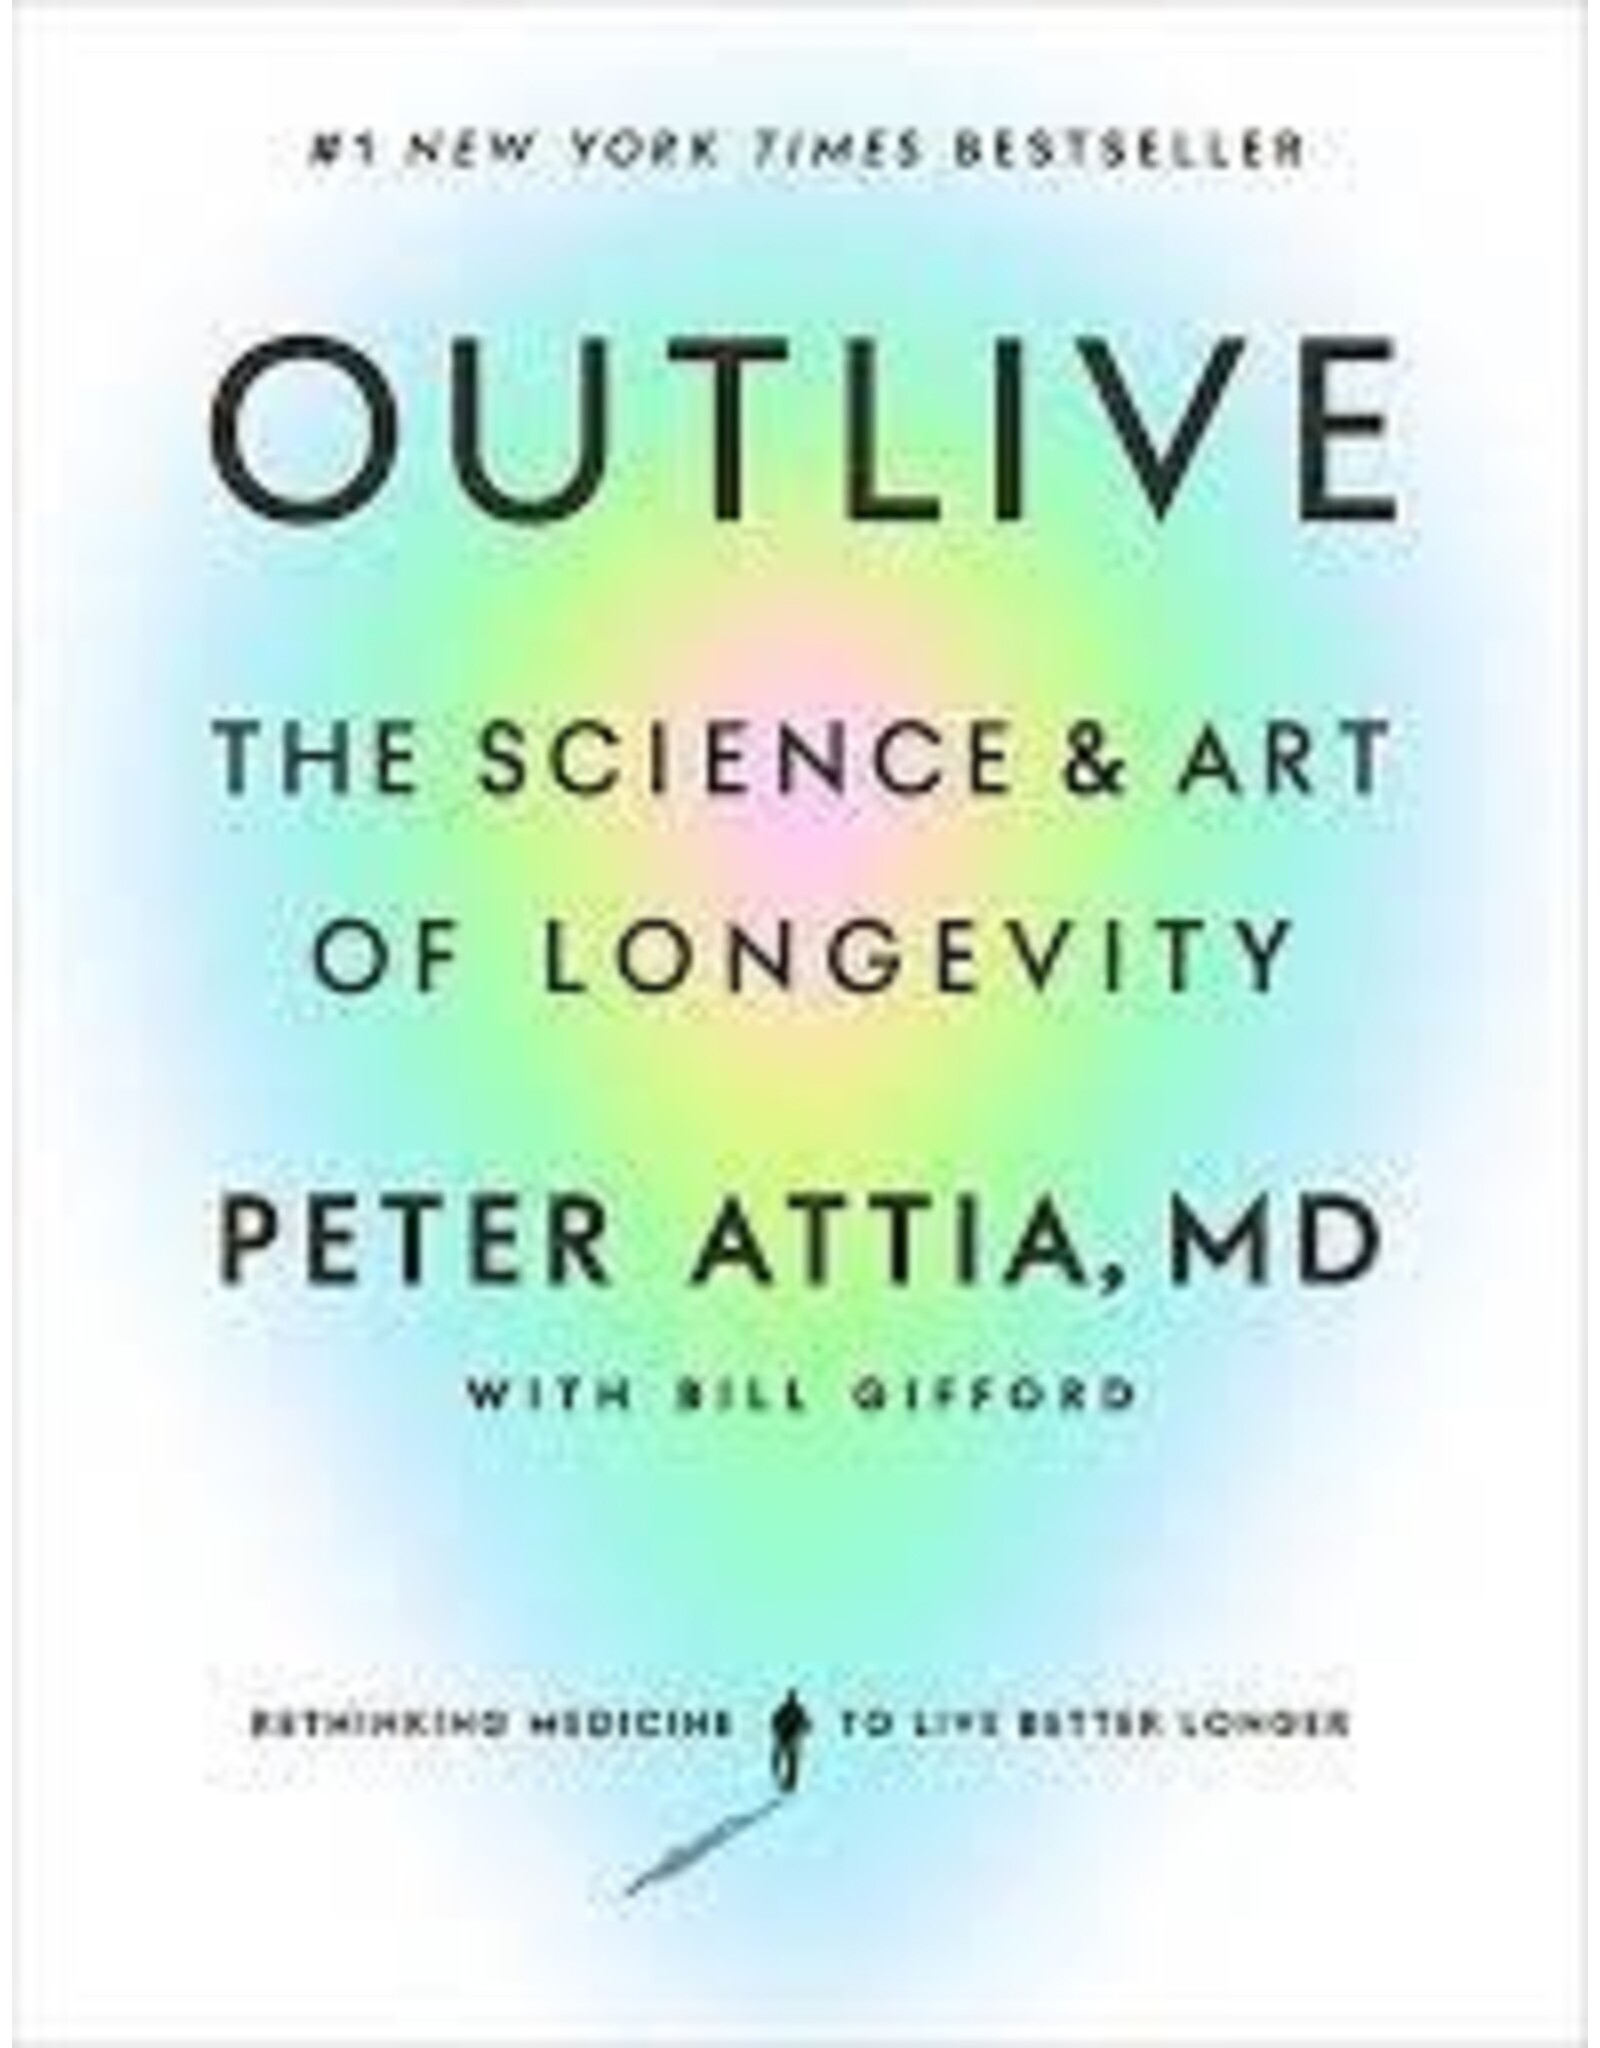 Outlive Book